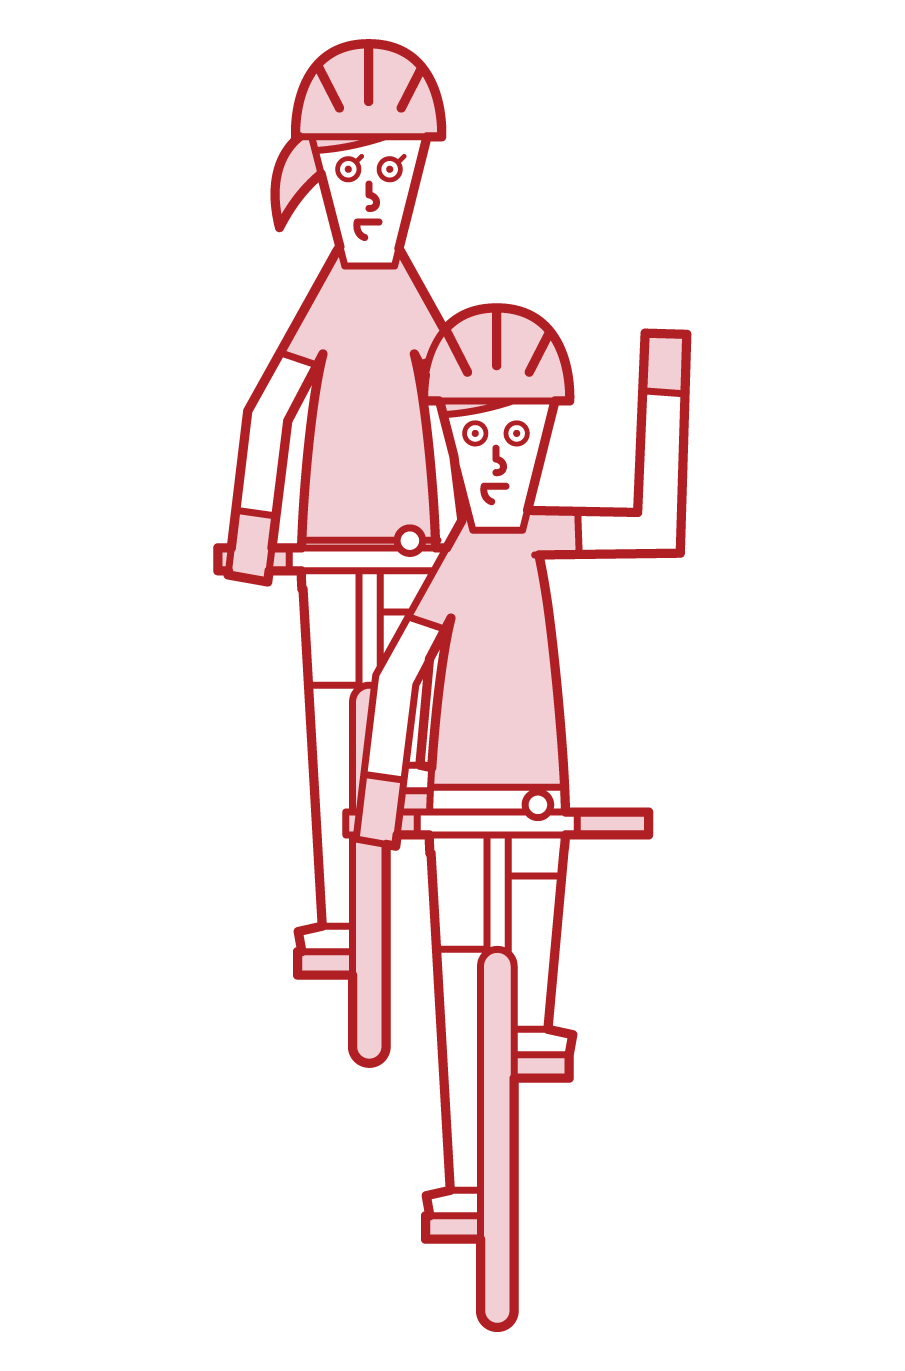 Illustration of hand signal of bicycle, right turn (male)